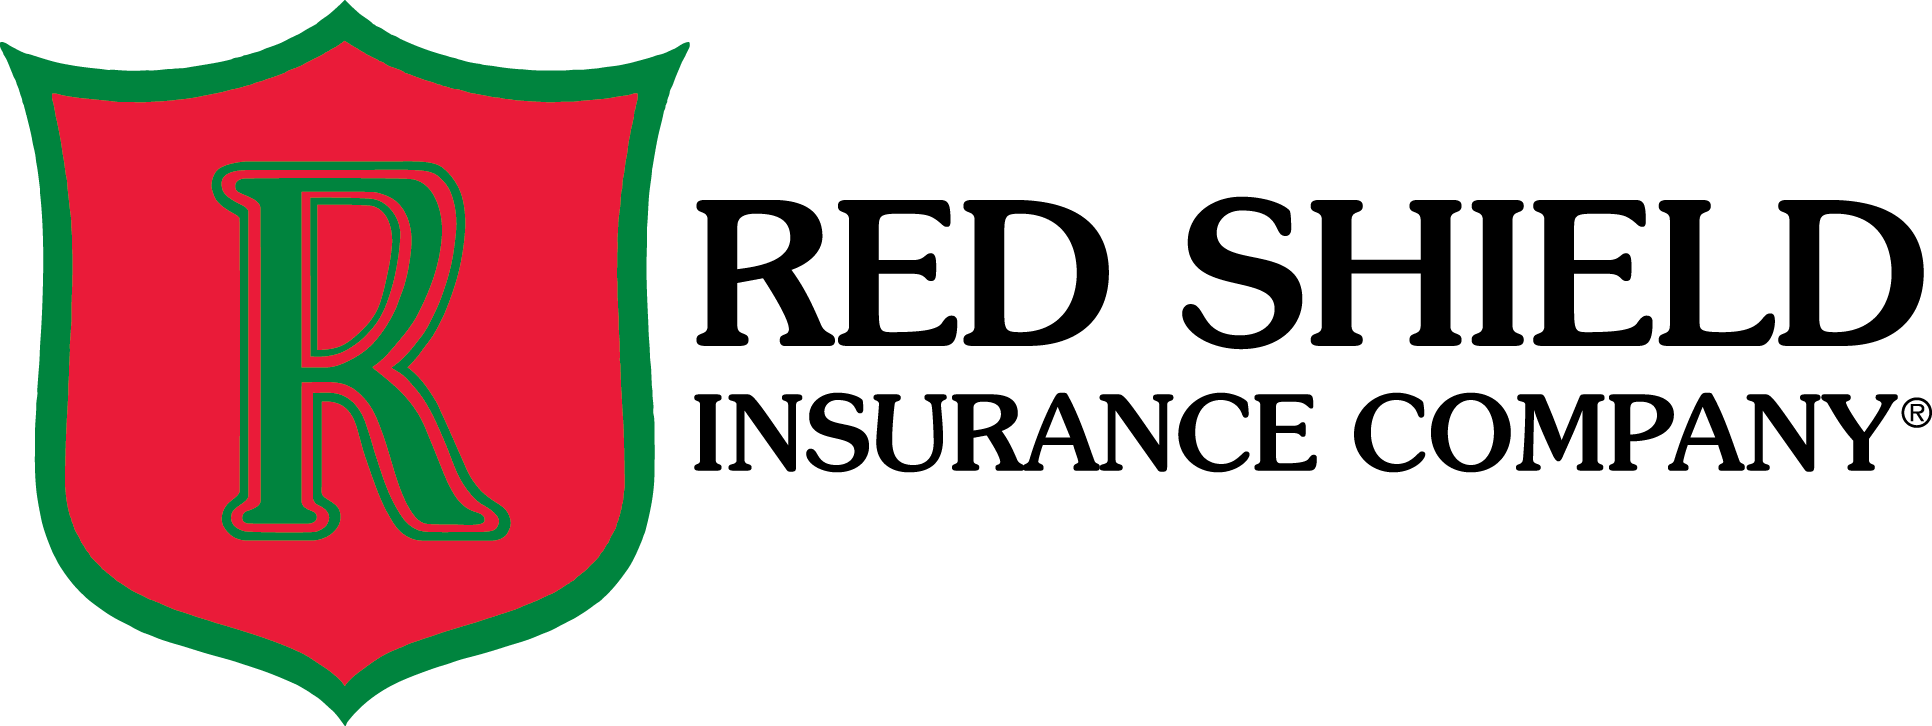 Name of Green and Red Shield Logo - KKlub Members - Professional Insurance Agents Western Alliance